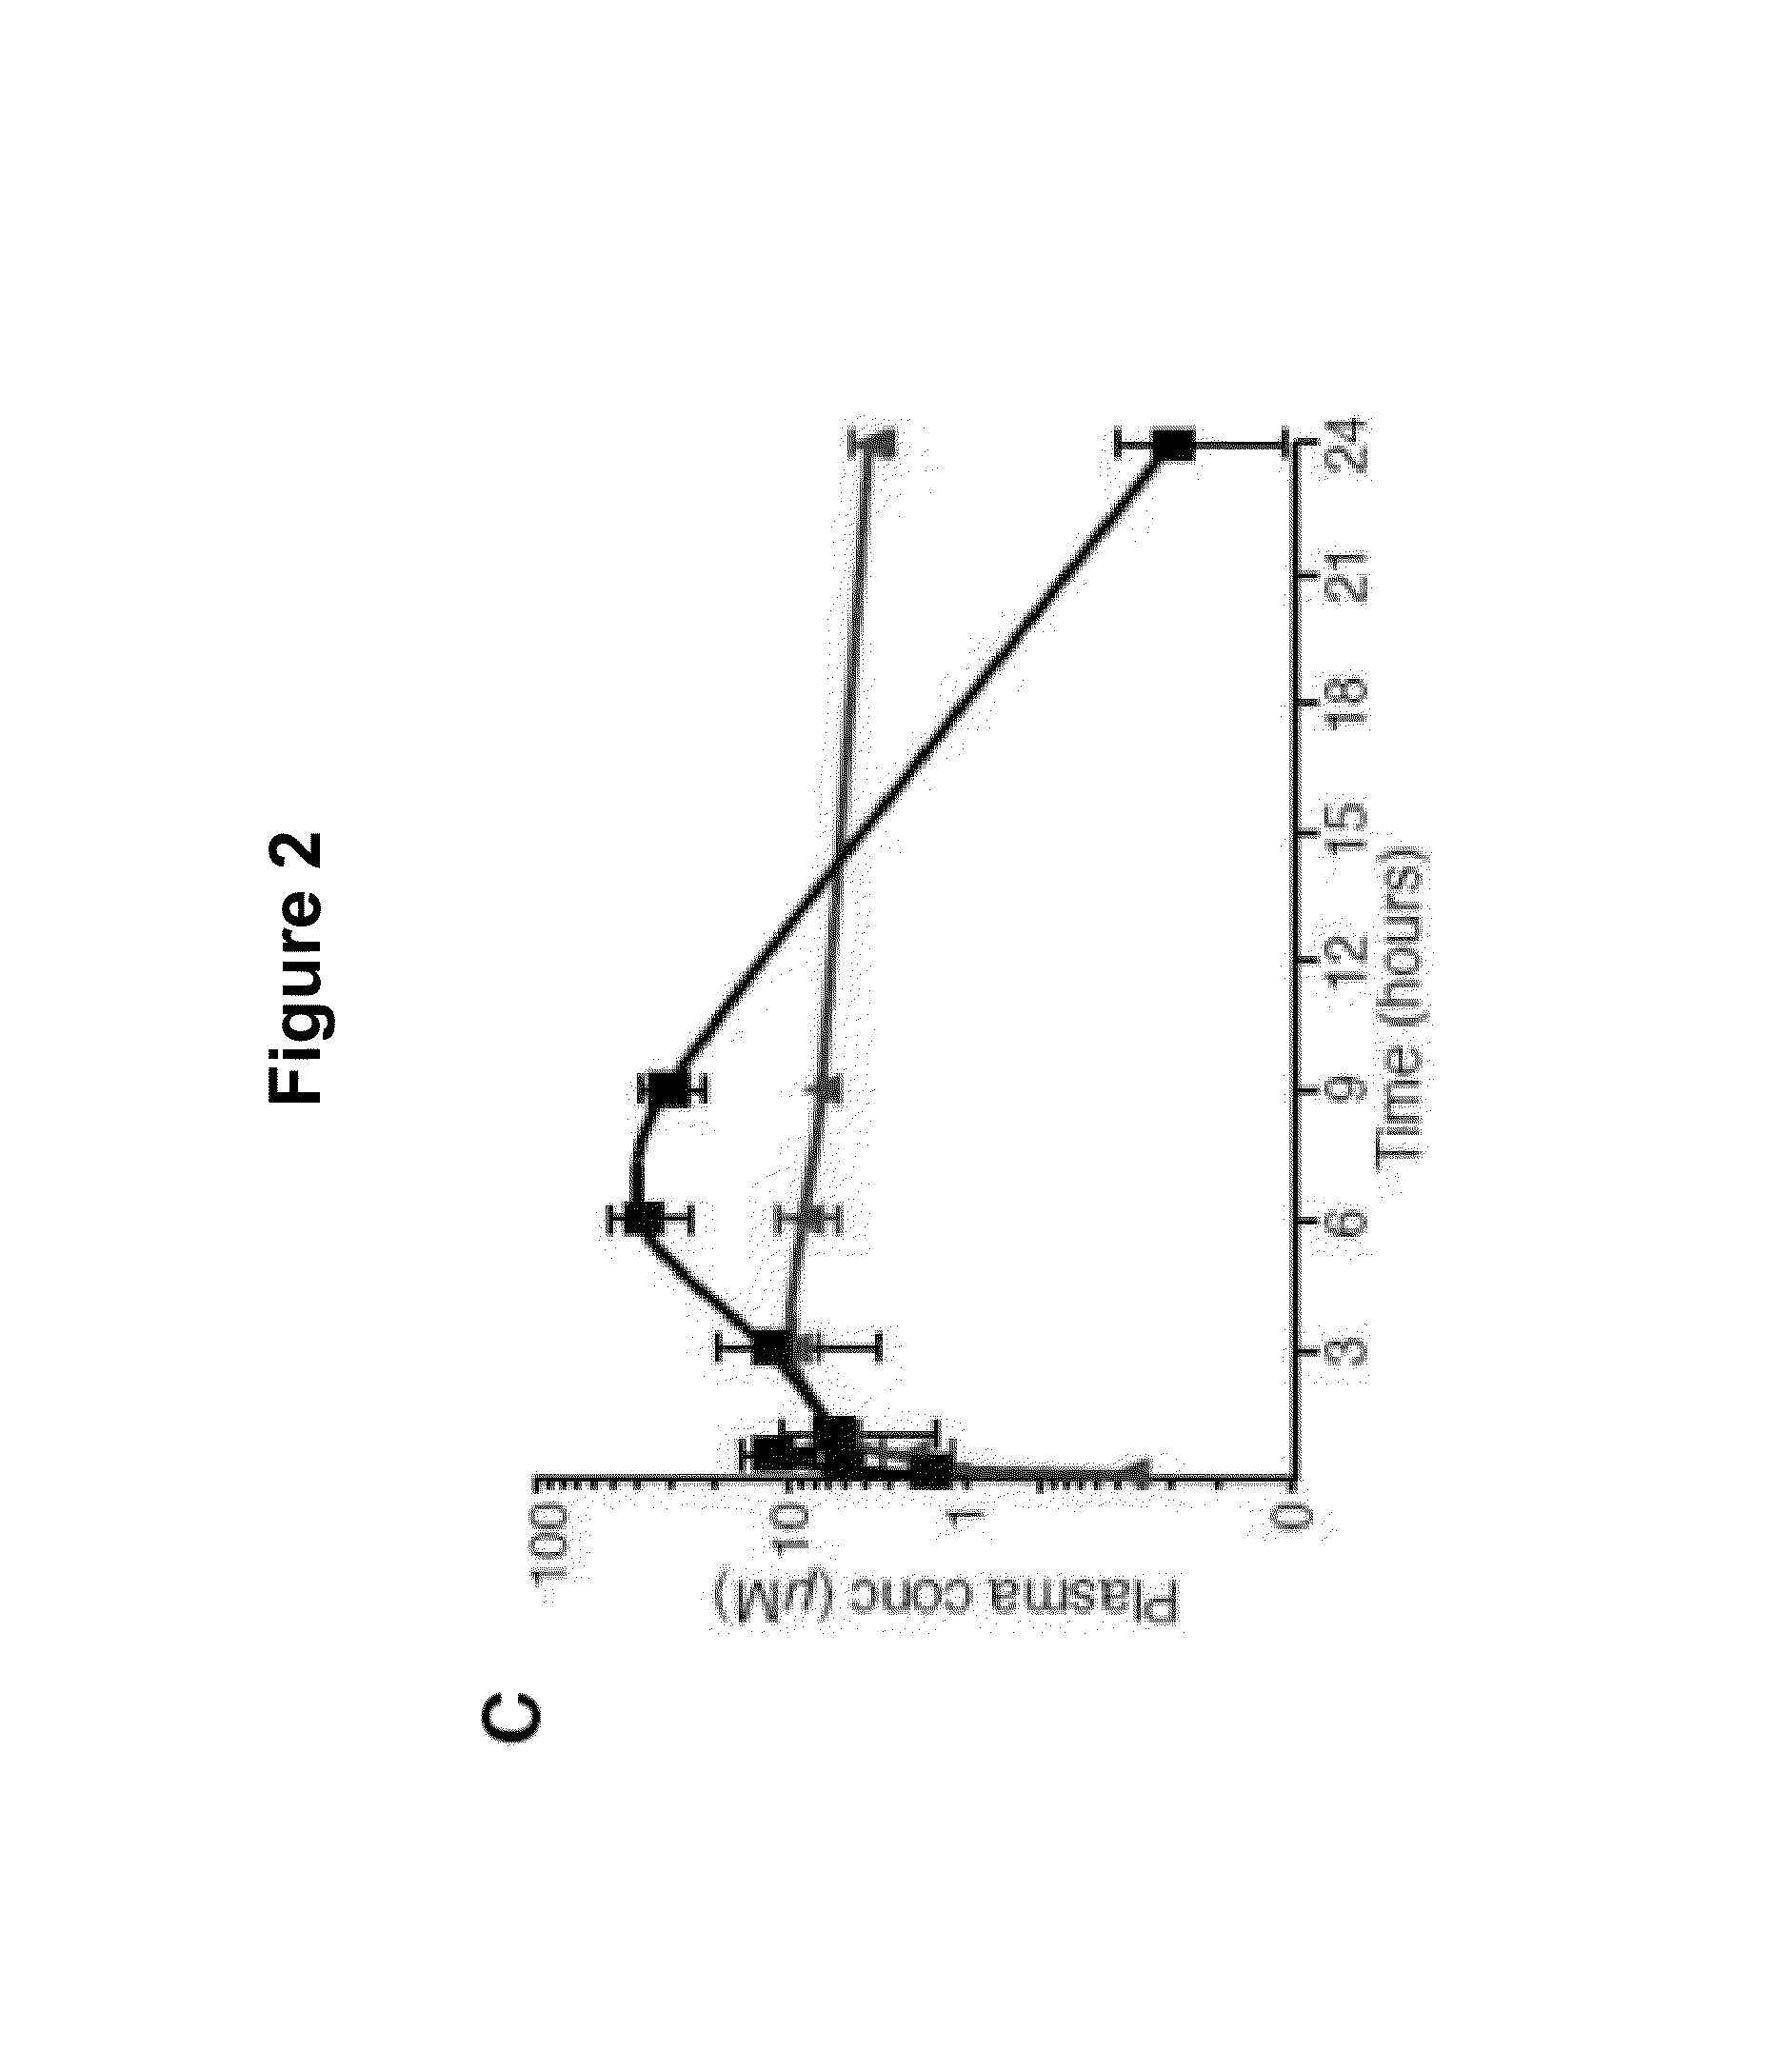 Mutant smoothened and methods of using the same